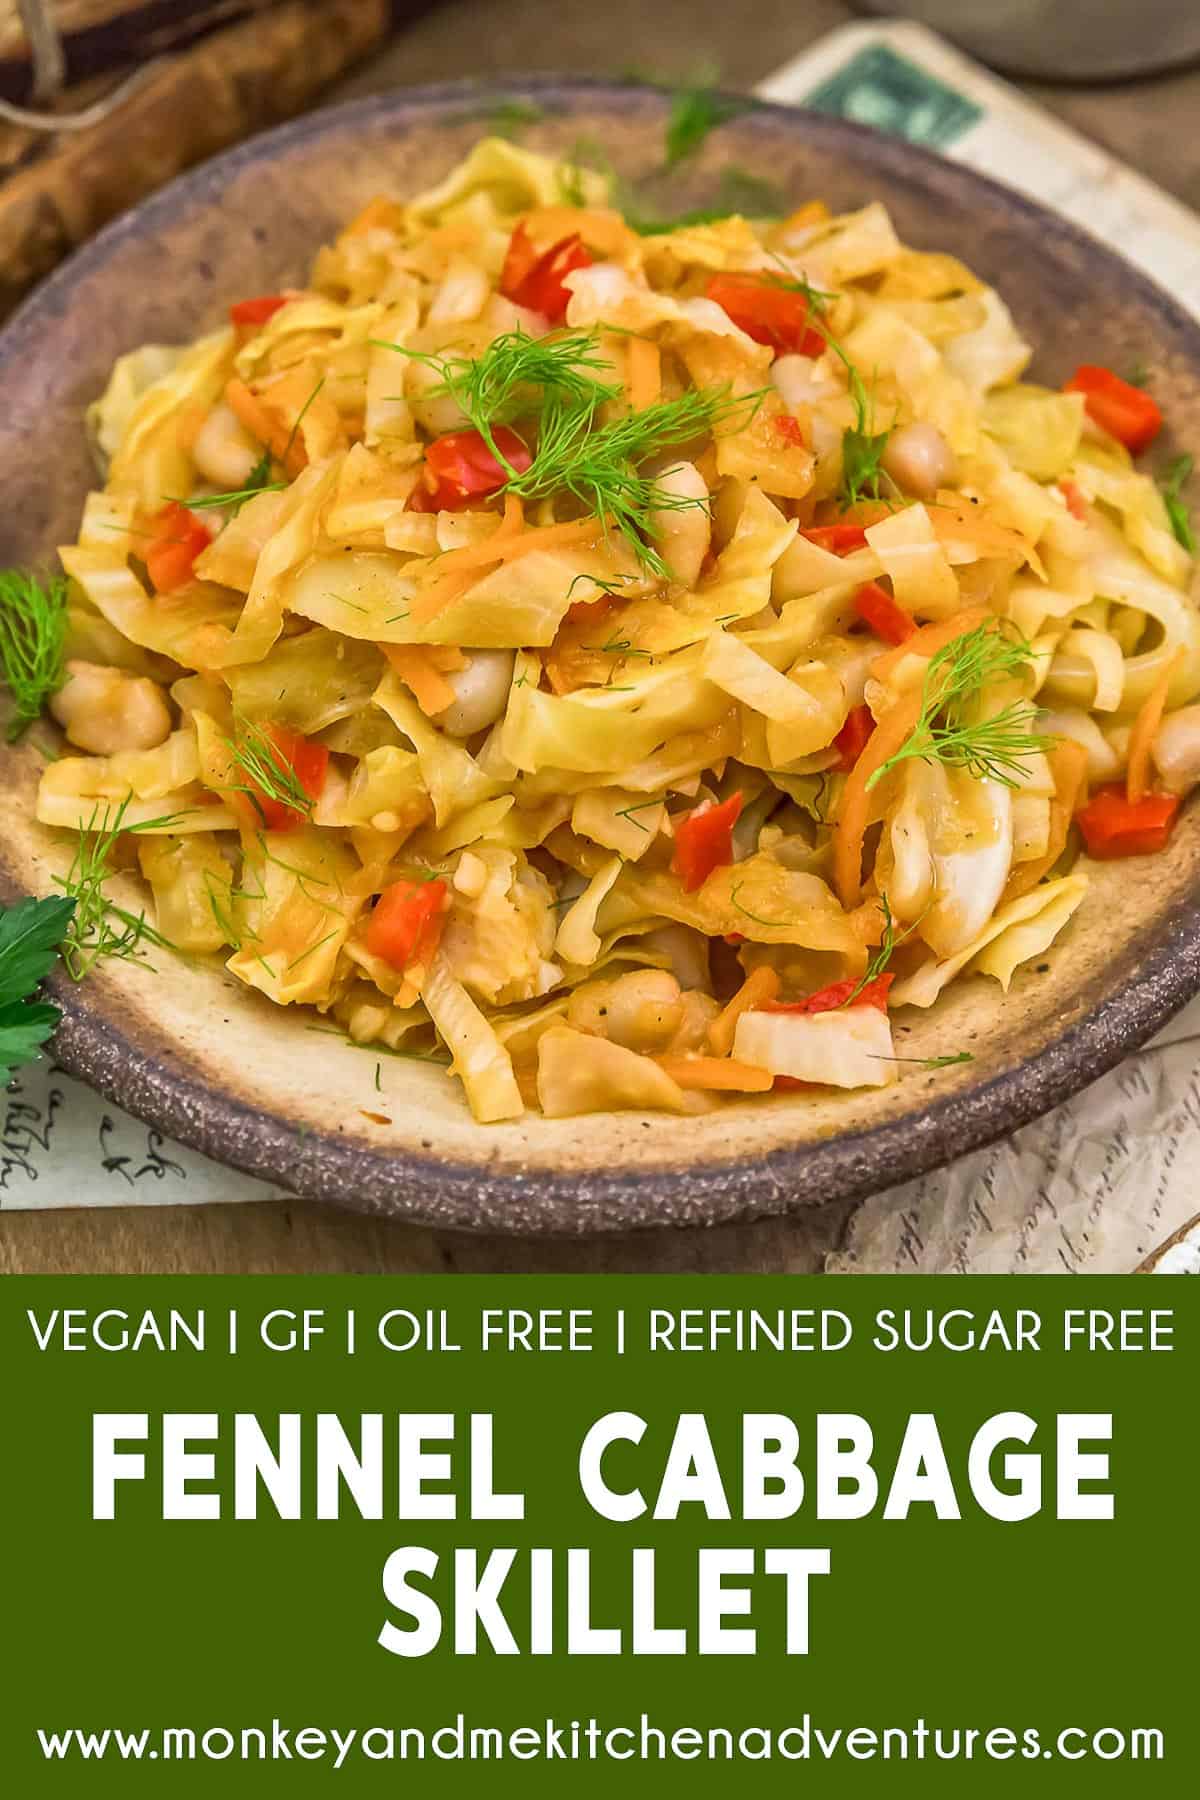 Fennel Cabbage Skillet with text description